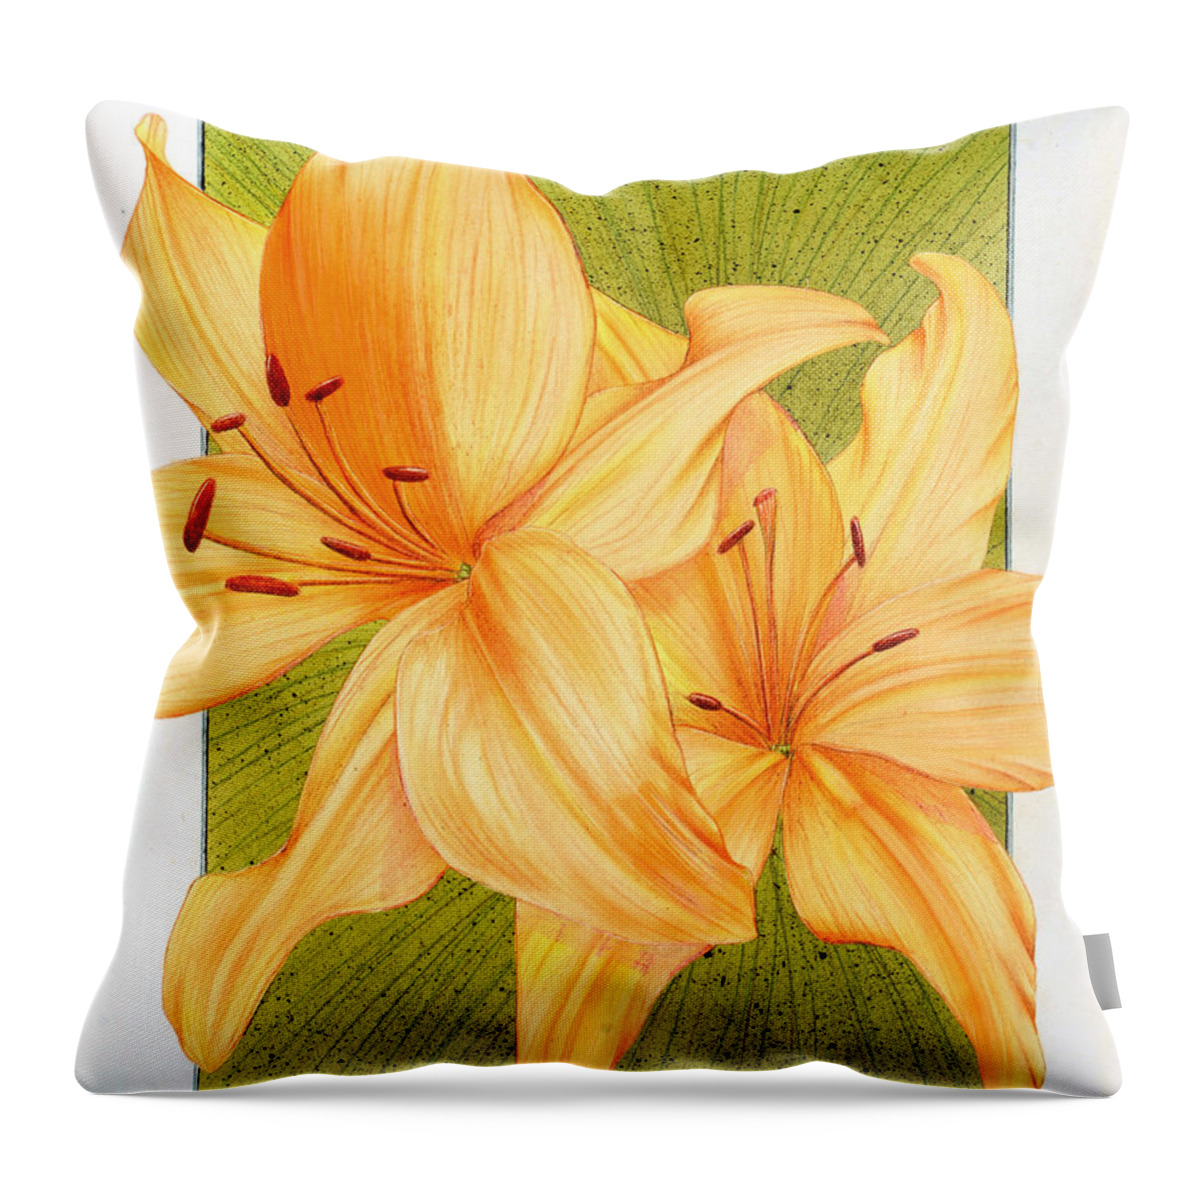 Lily Throw Pillow featuring the mixed media Bounding Bloom by Sam Davis Johnson